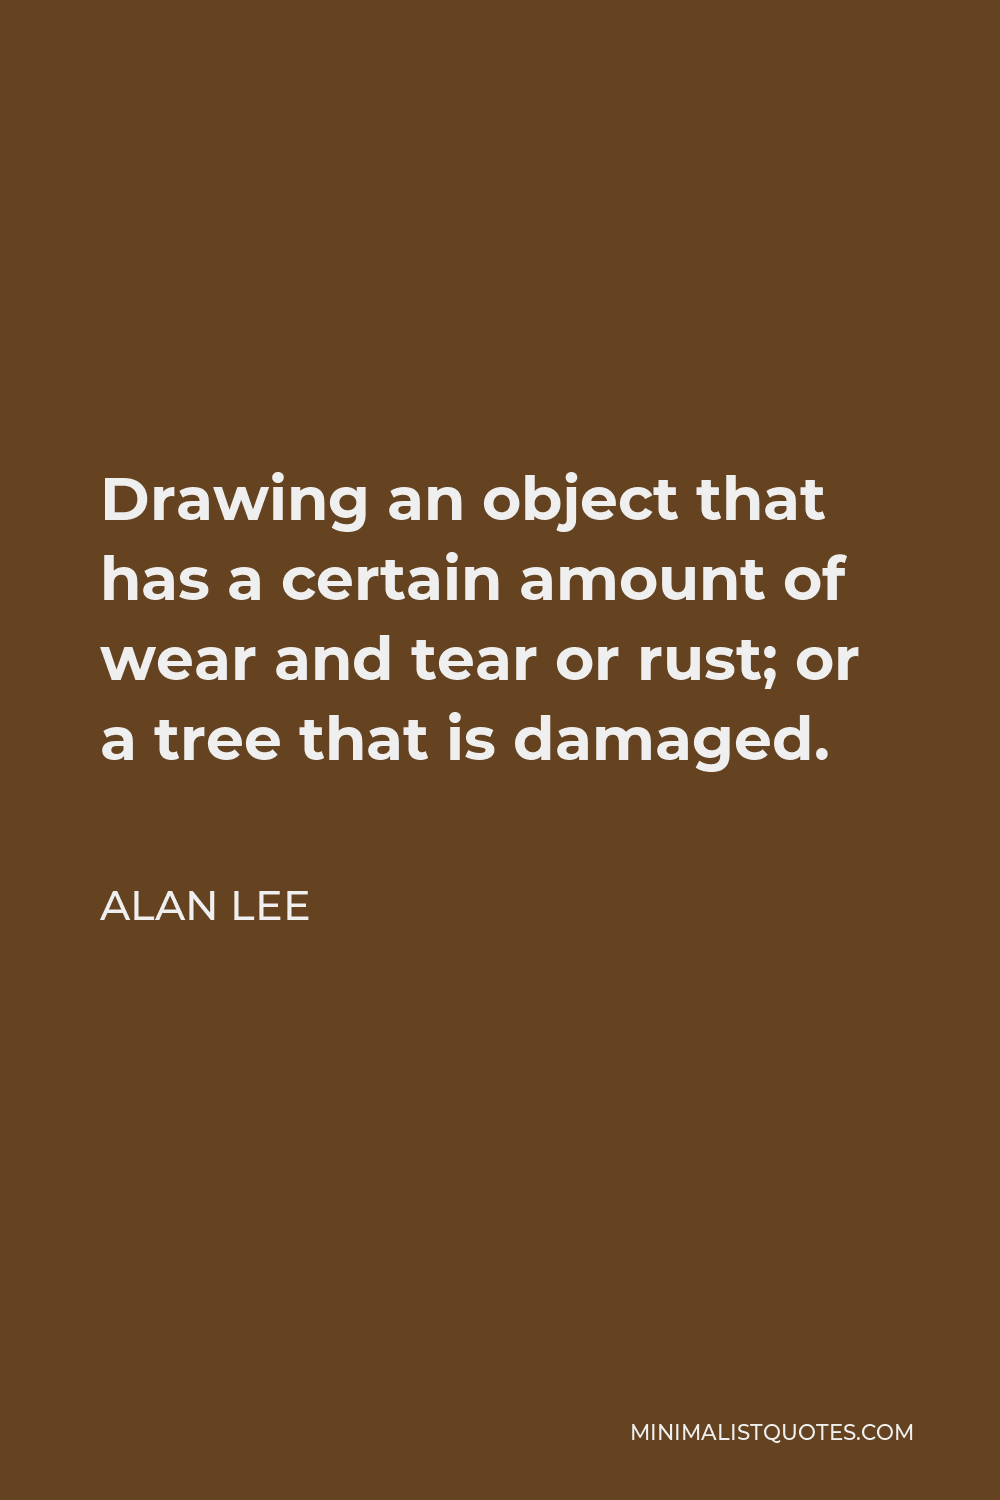 Alan Lee Quote - Drawing an object that has a certain amount of wear and tear or rust; or a tree that is damaged.